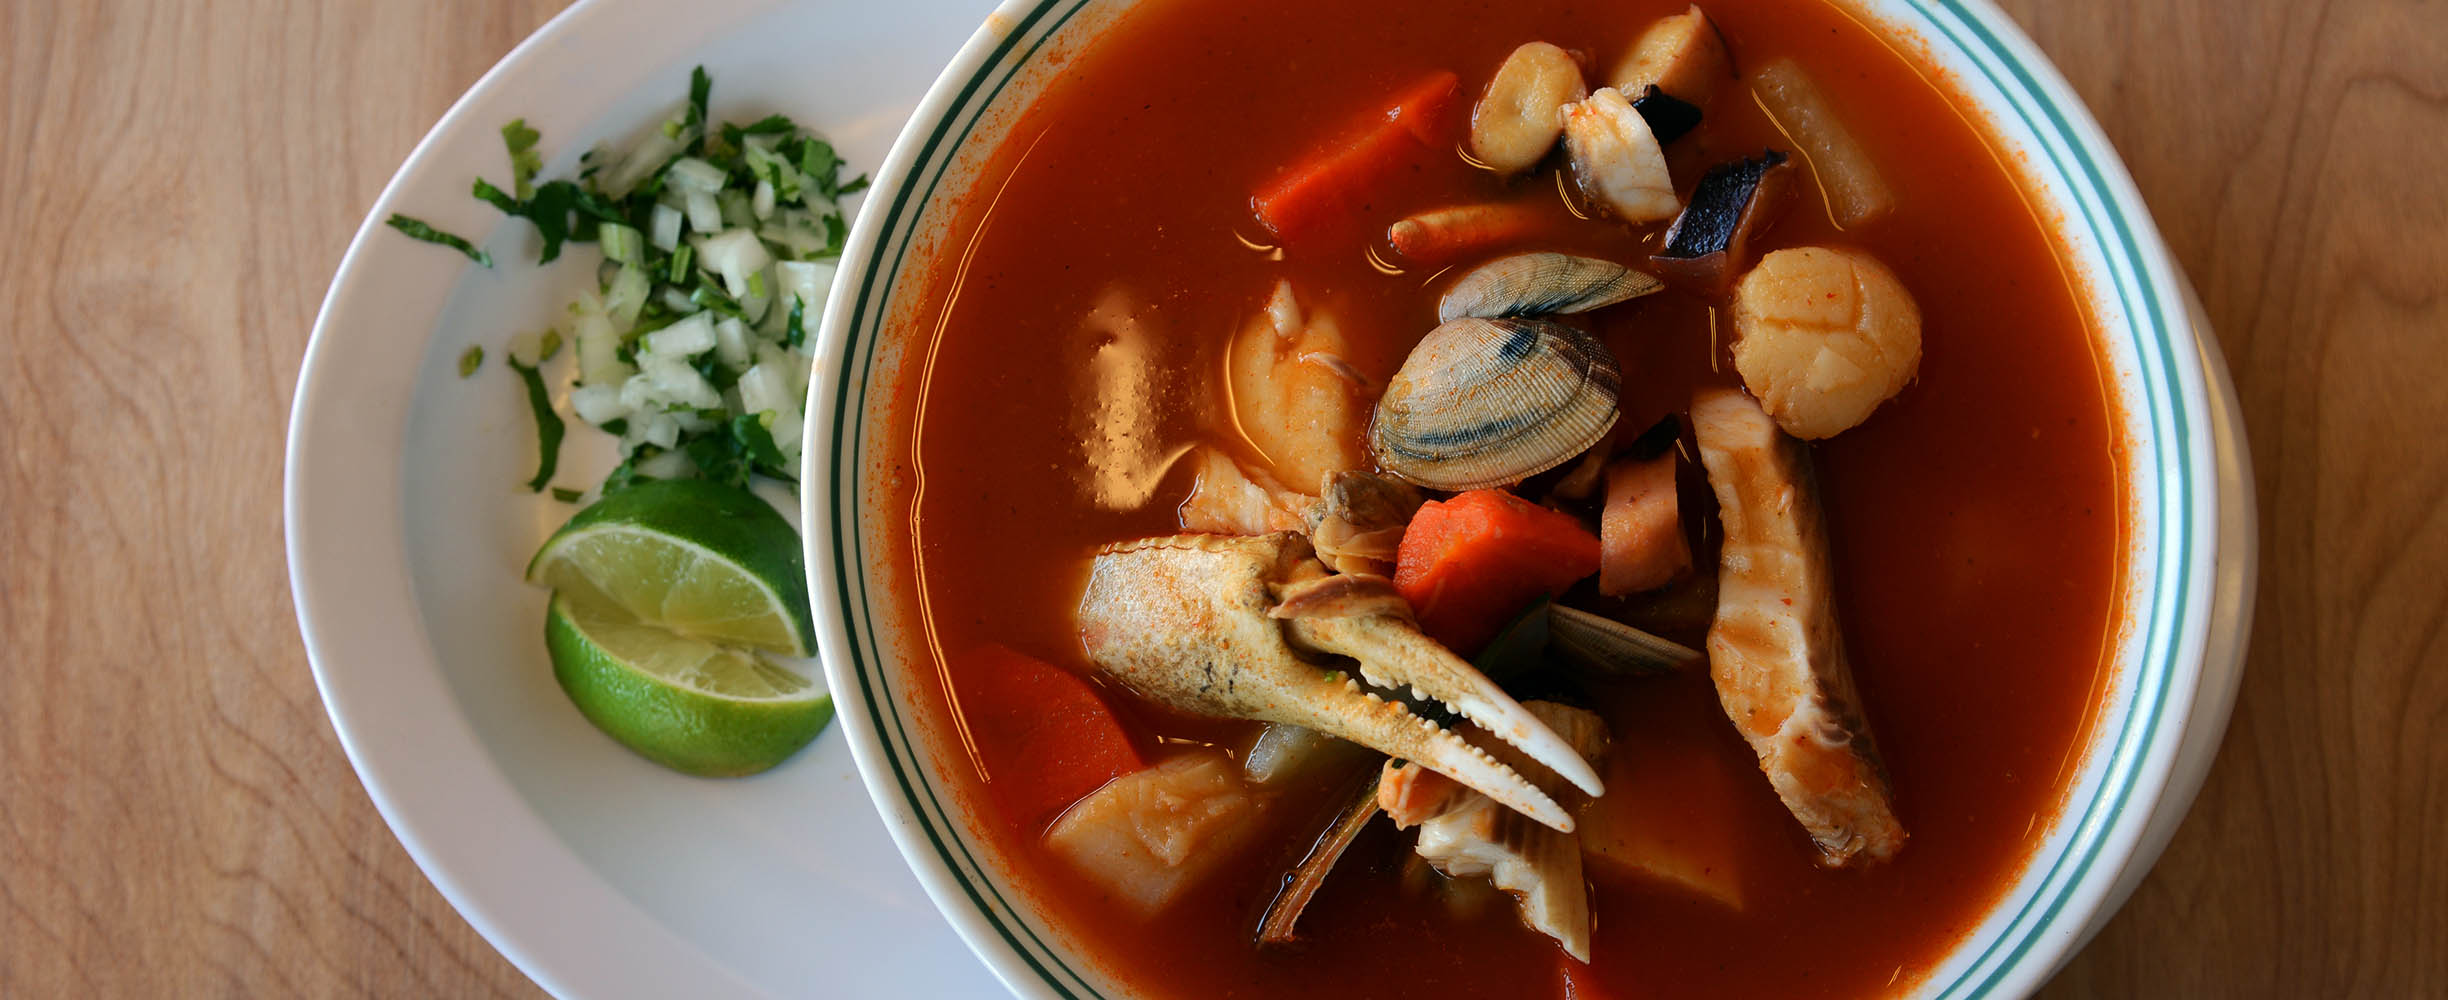 Mexican soup Sopa 7 Mares with fish, crab, clams and spices.